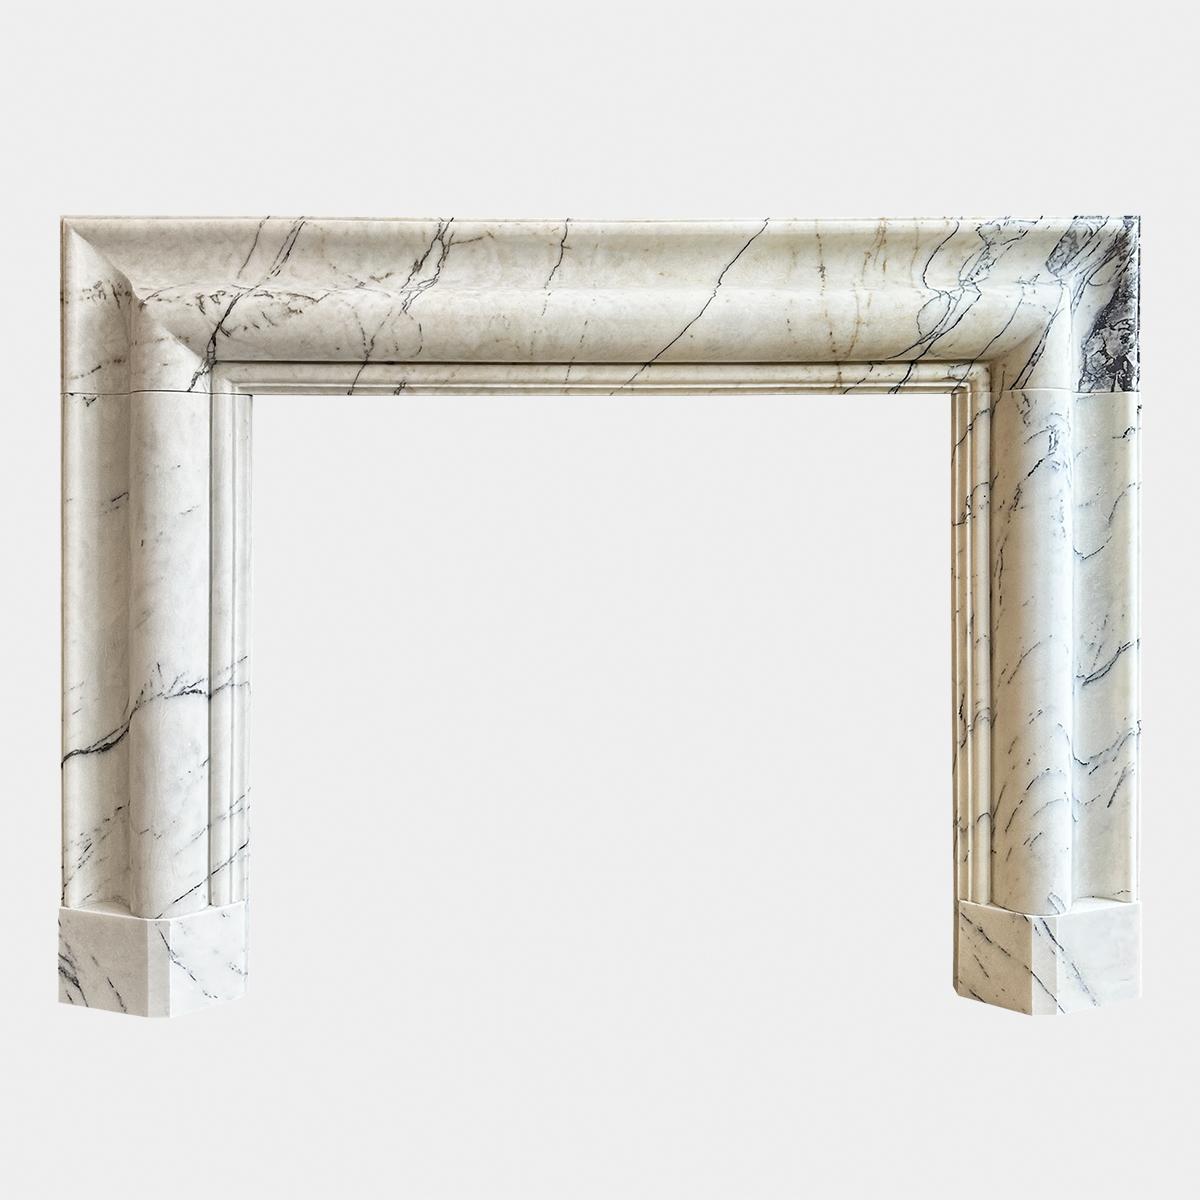 A pair of large substantial reclaimed bolection fireplaces from Italy, executed in a form of Carrara marble known as Calacatta Vagli . Pale background colours with gold tones and hues with stricking purple and grey veins. Wide framed, stood on